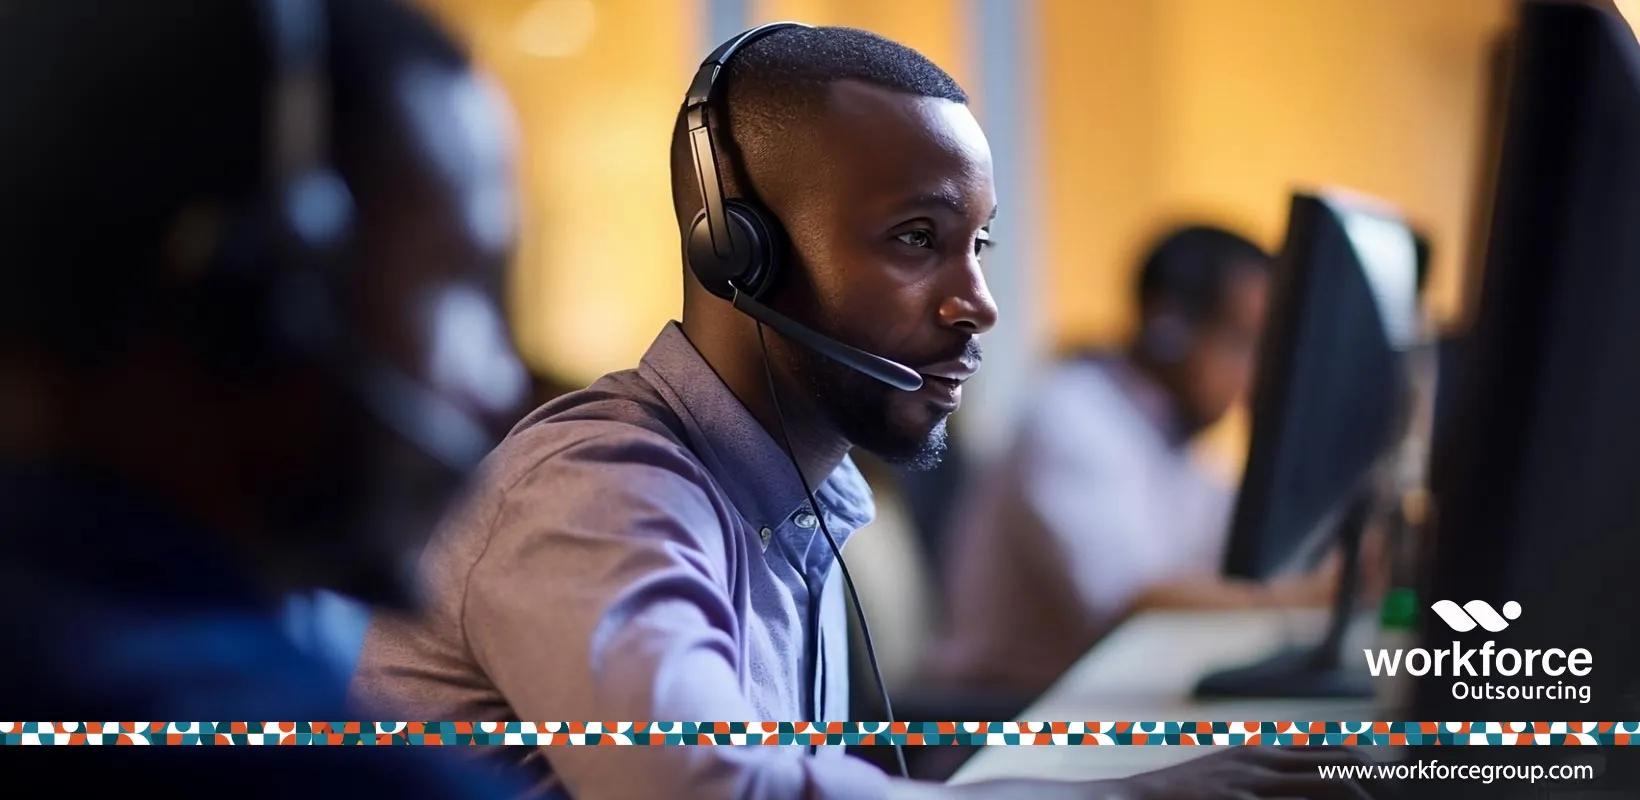 7 Benefits of Outsourcing Your Call Centre Operations